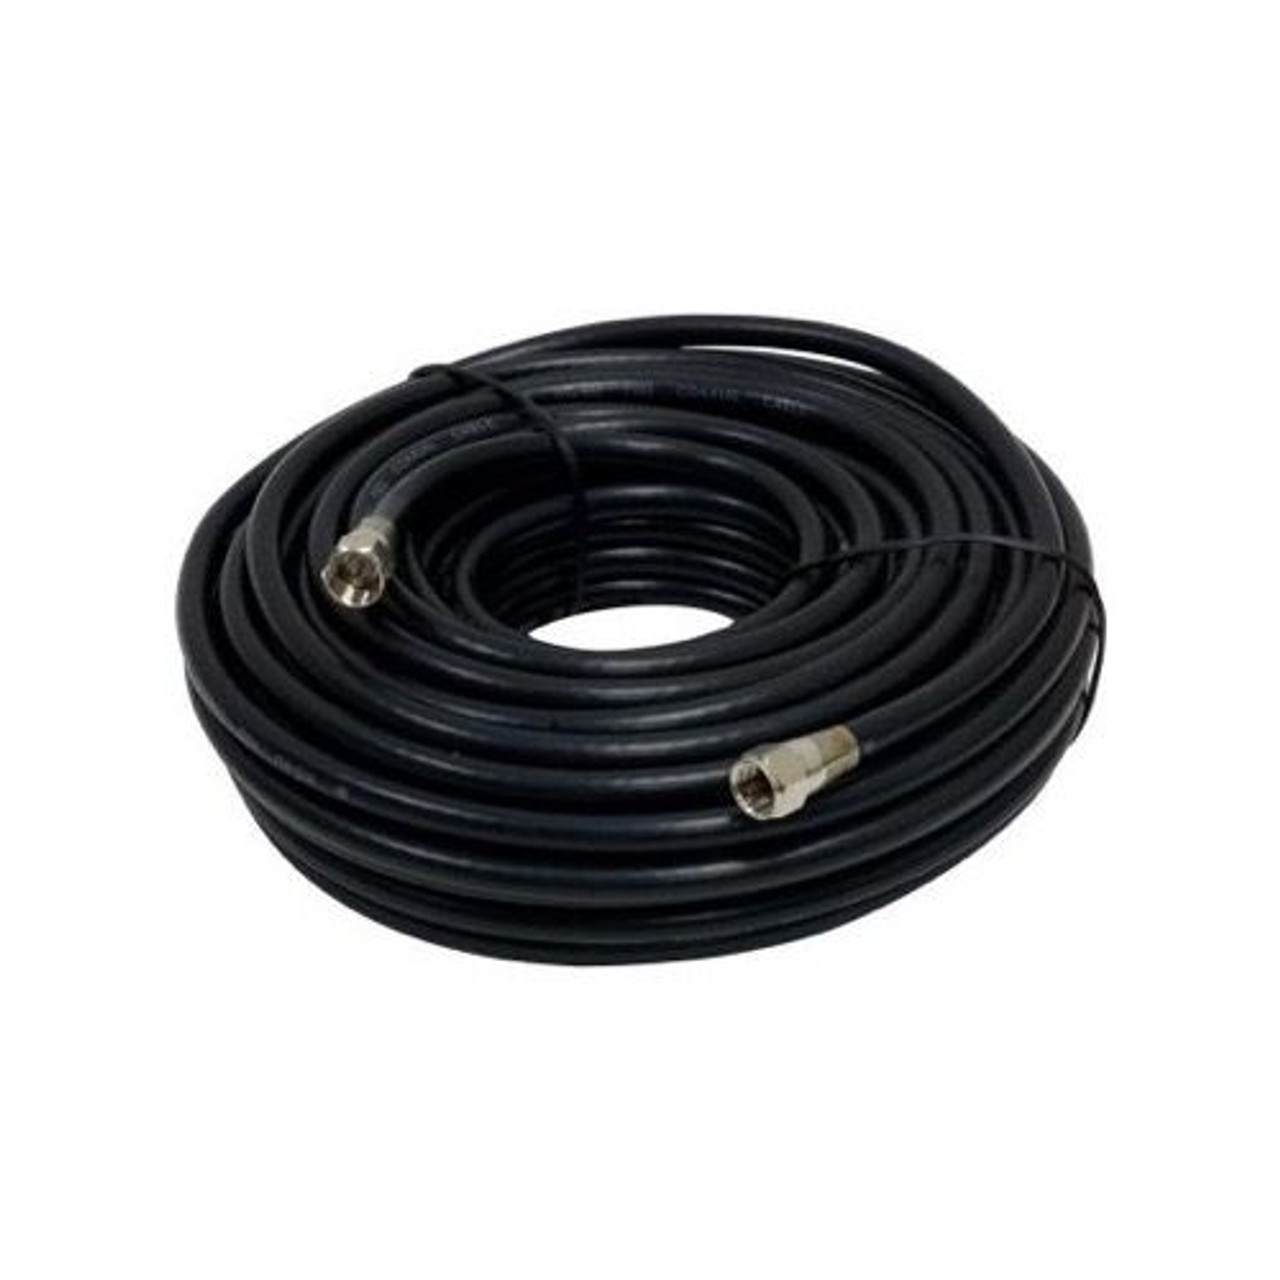 Woods Gizzmo 7038 50' FT RG6 Coaxial Cable Black Studio Grade with F Connector Each End 18 AWG Signal 75 Ohm Shielded with Factory Installed Plugs, Black, Studio Grade, Part # Woods Gizzmo 7038